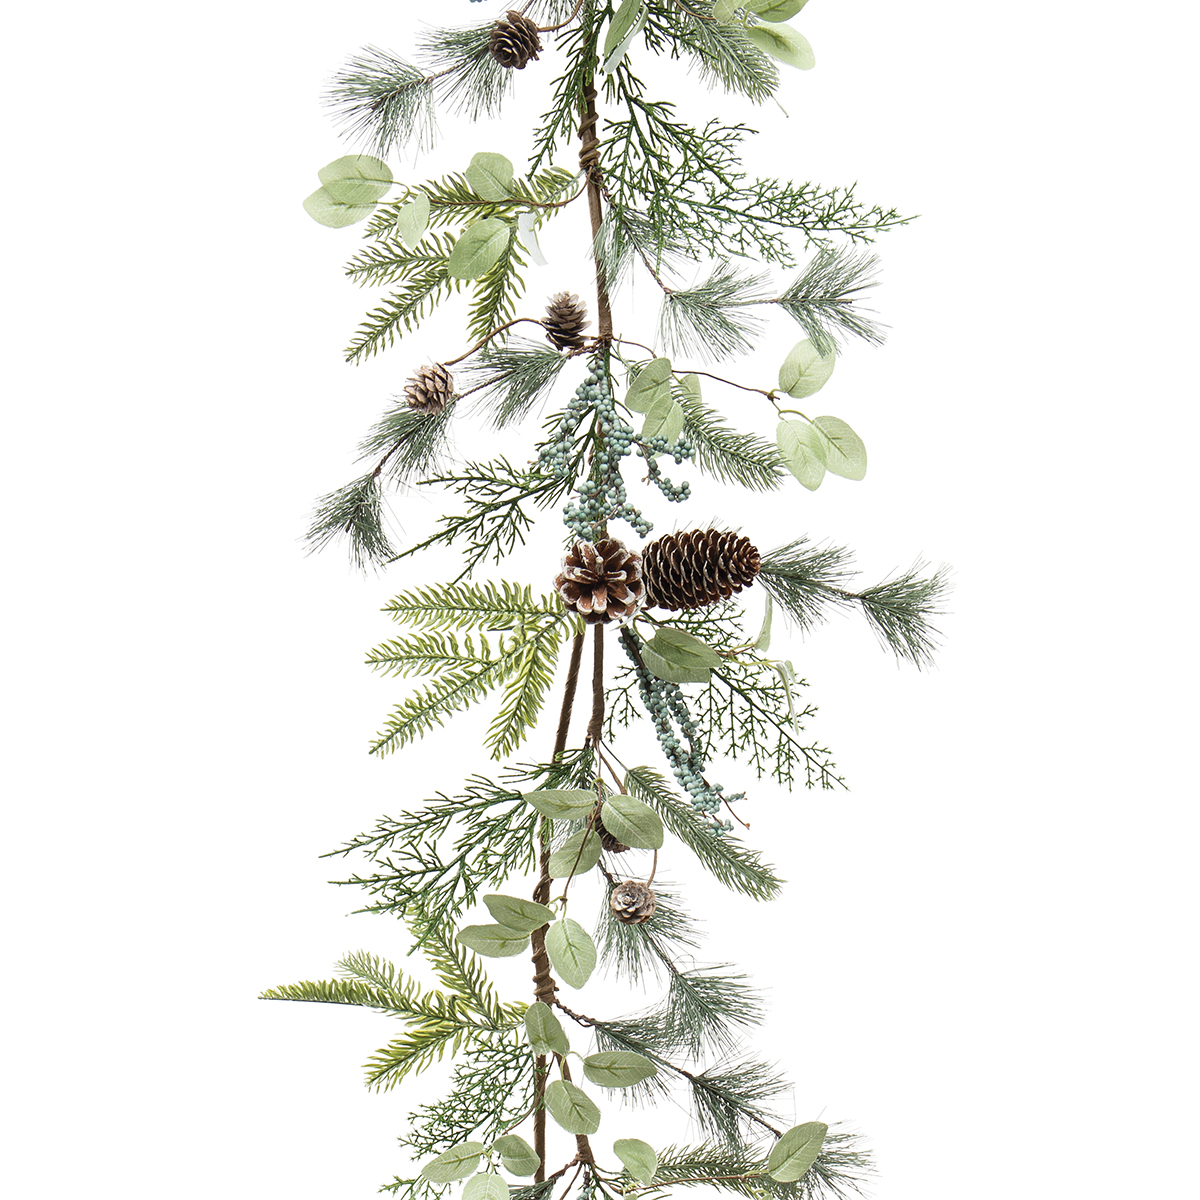 !WINTER GREEN PINE MIX GARLAND WITH JUNIPER BERRIES AND